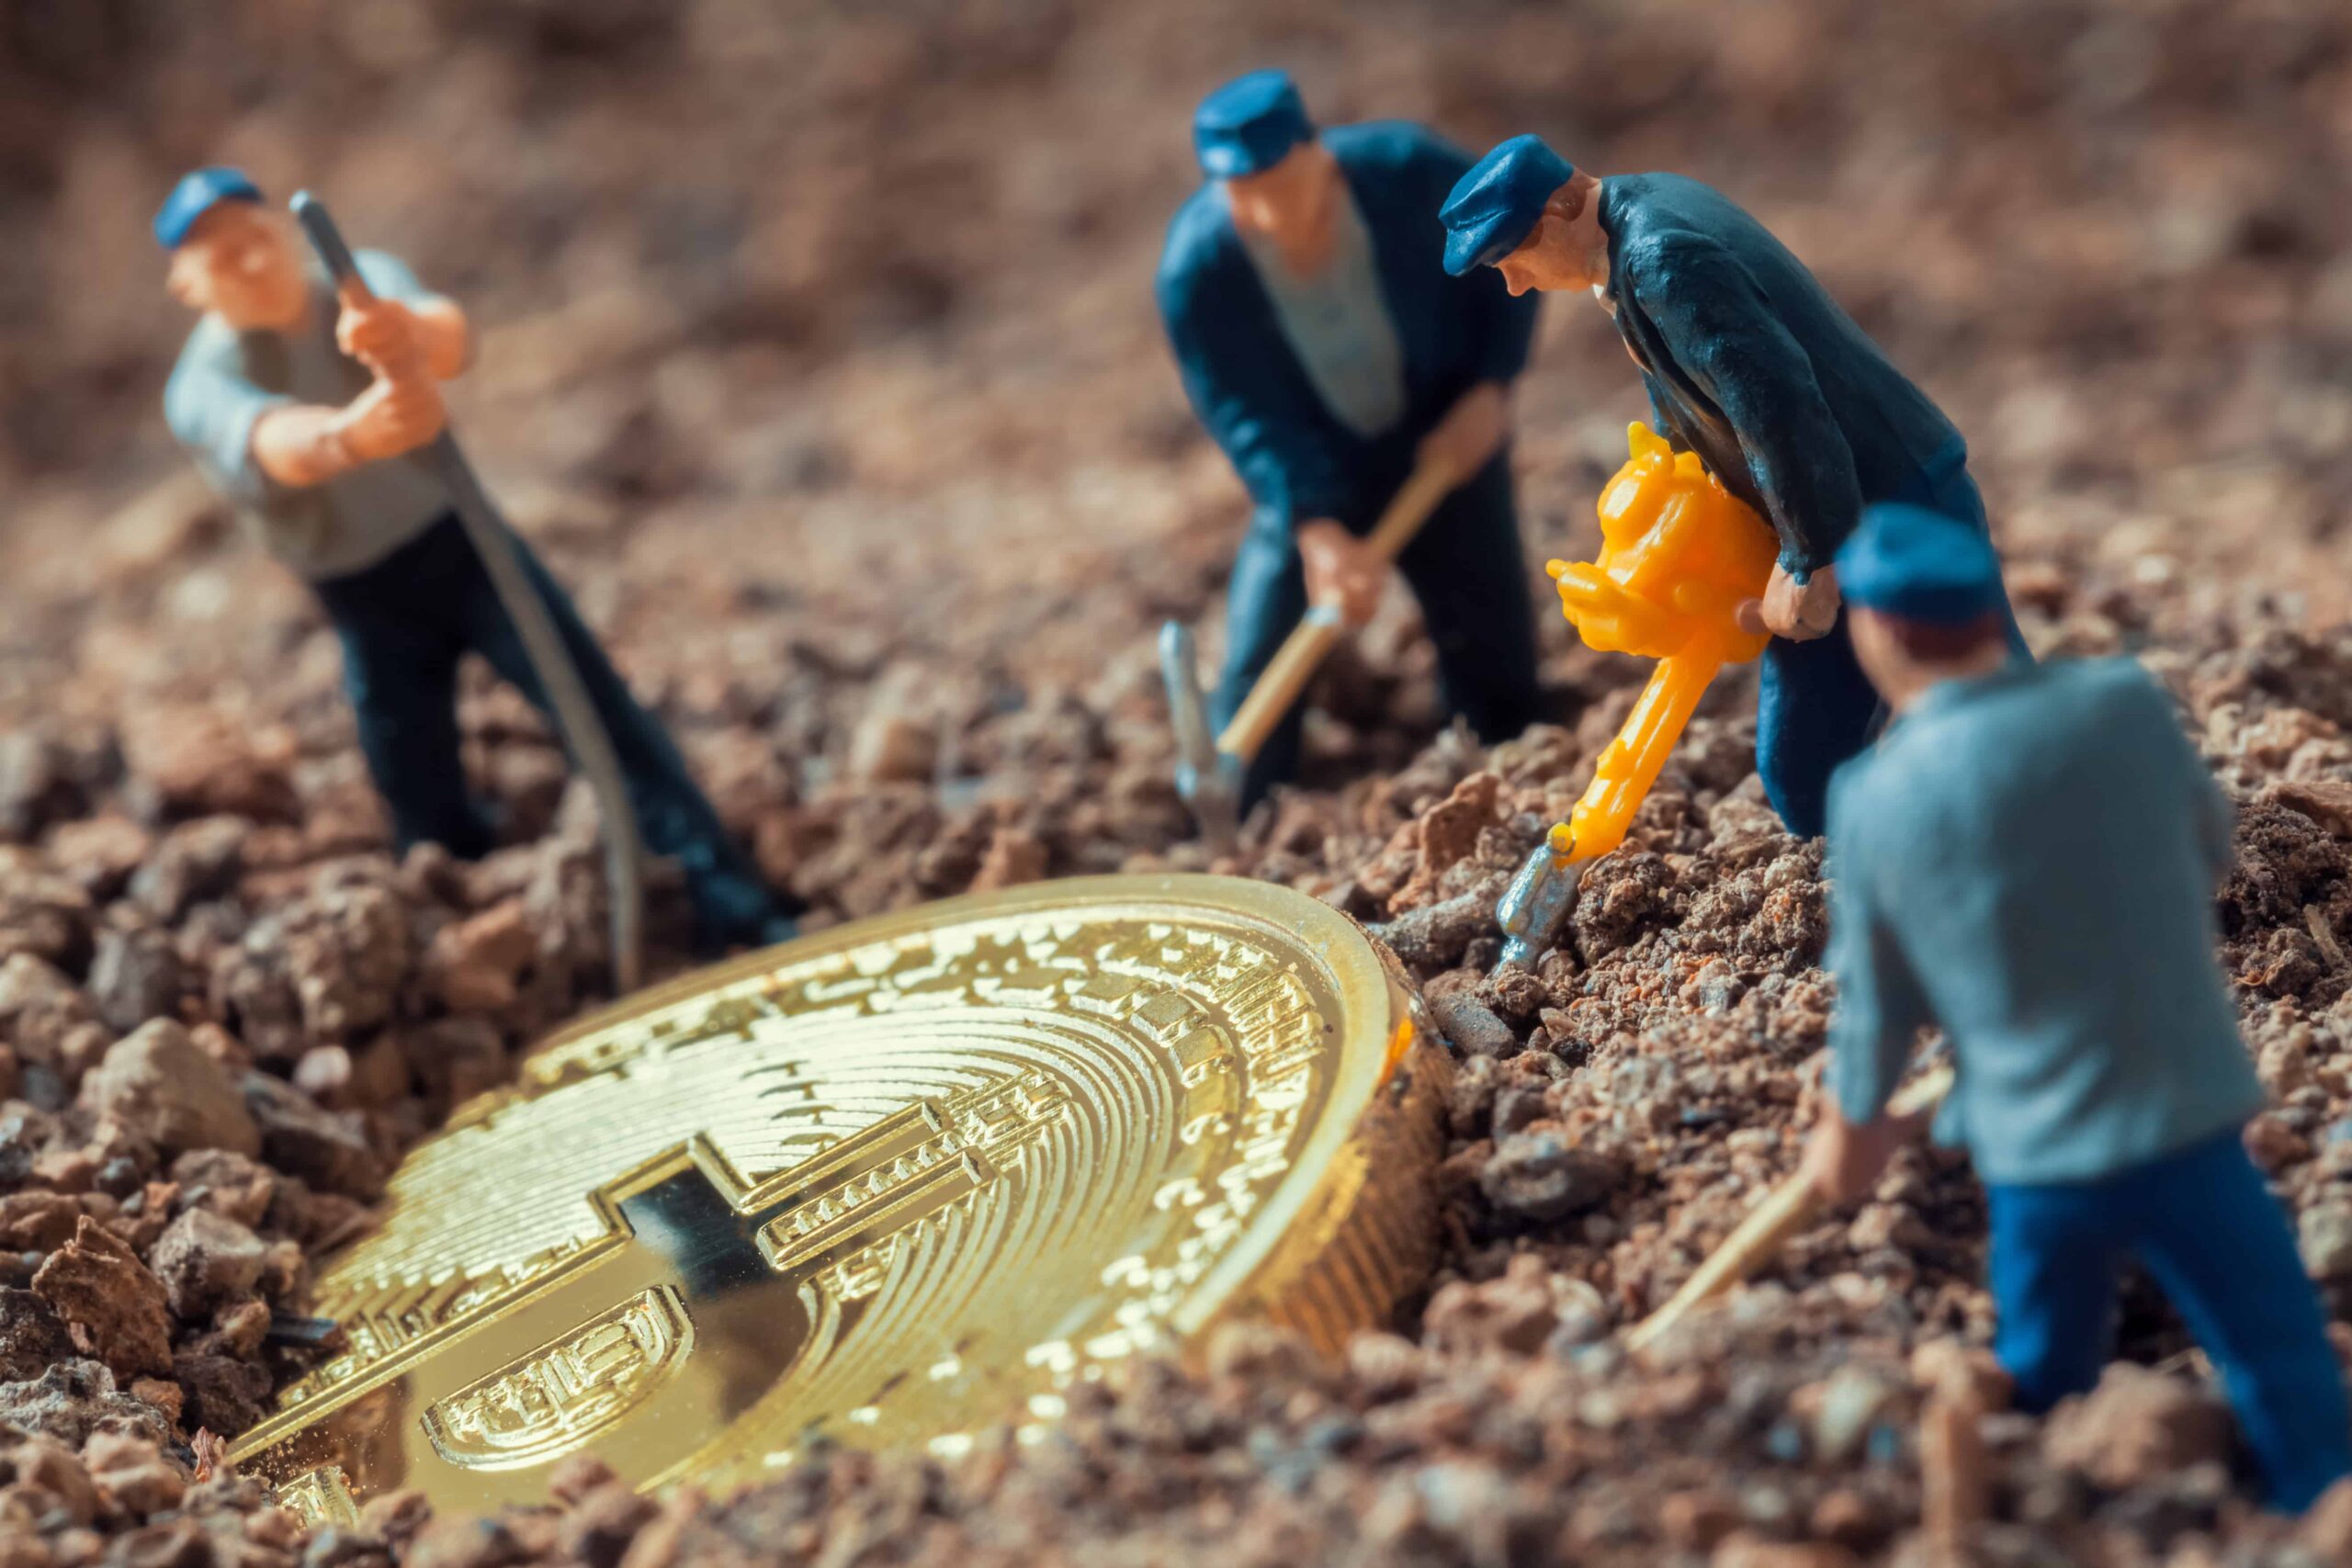 macro miner figurines digging ground uncover big shiny bitcoin scaled